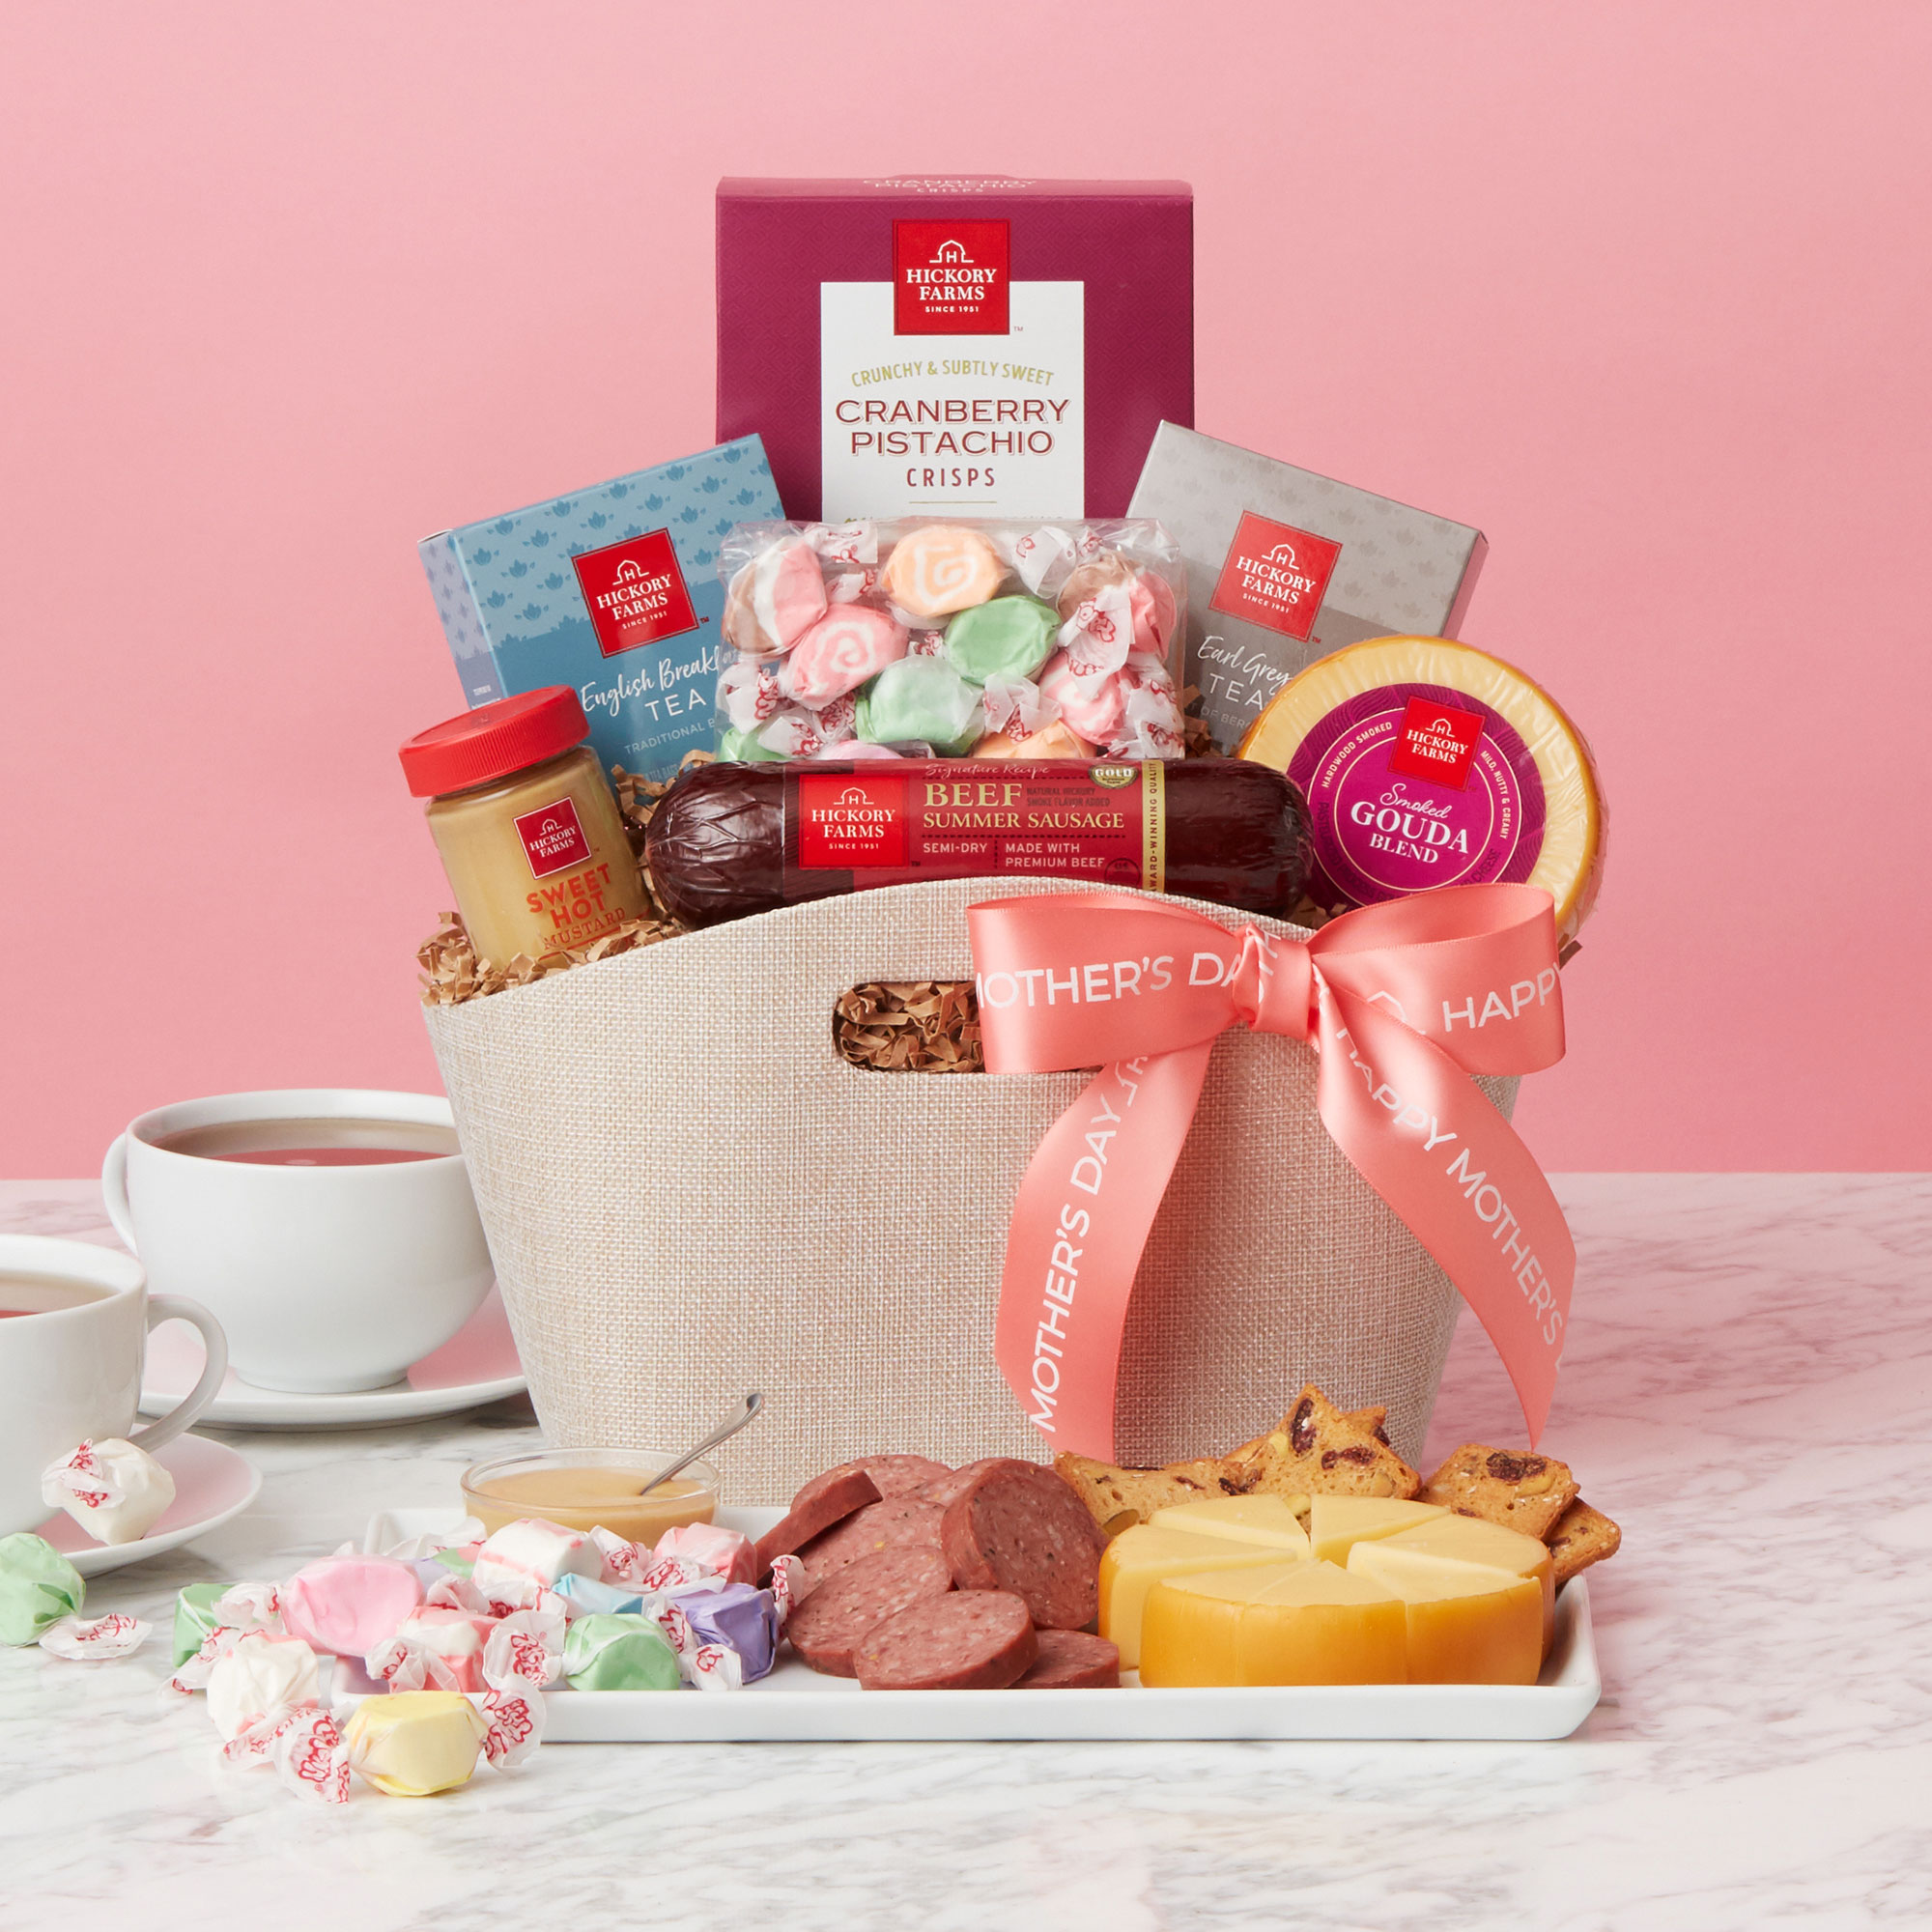 https://www.hickoryfarms.com/on/demandware.static/-/Sites-Web-Master-Catalog/default/dw6b5cd9f0/images/products/mothers-day-tea-party-gift-basket-006554-2.jpg